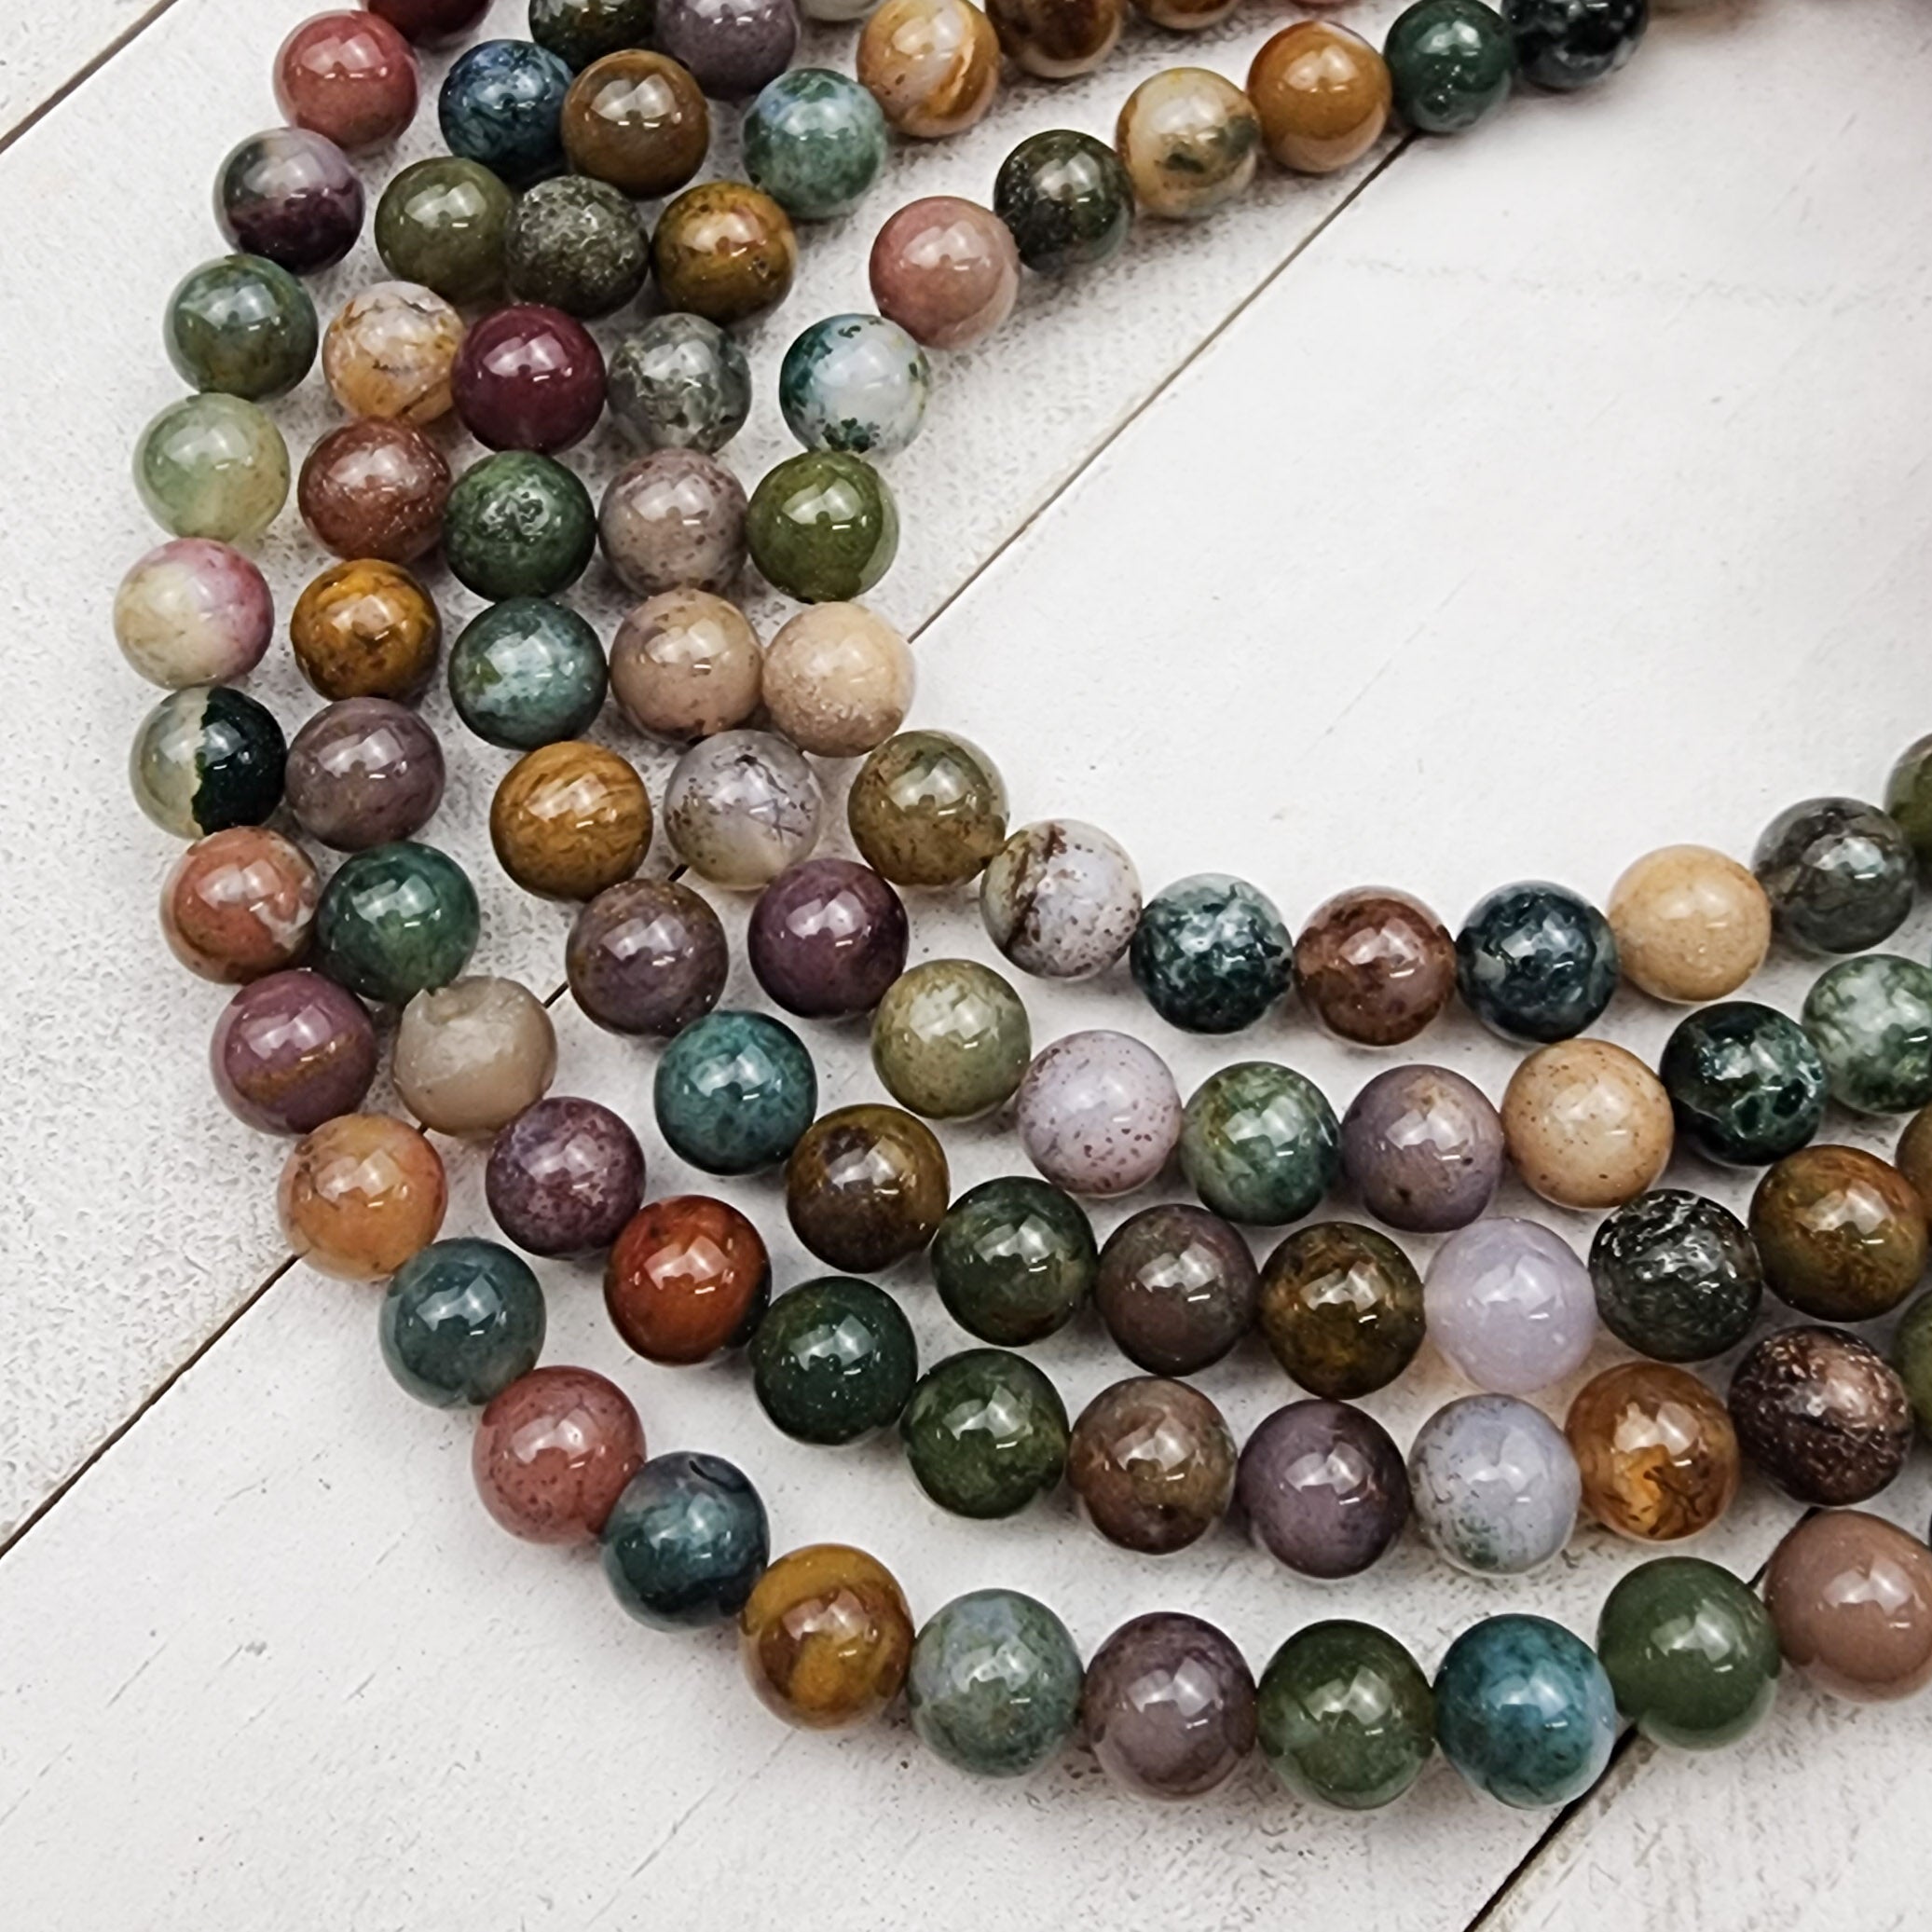 6mm Indian Agate Bead Strand